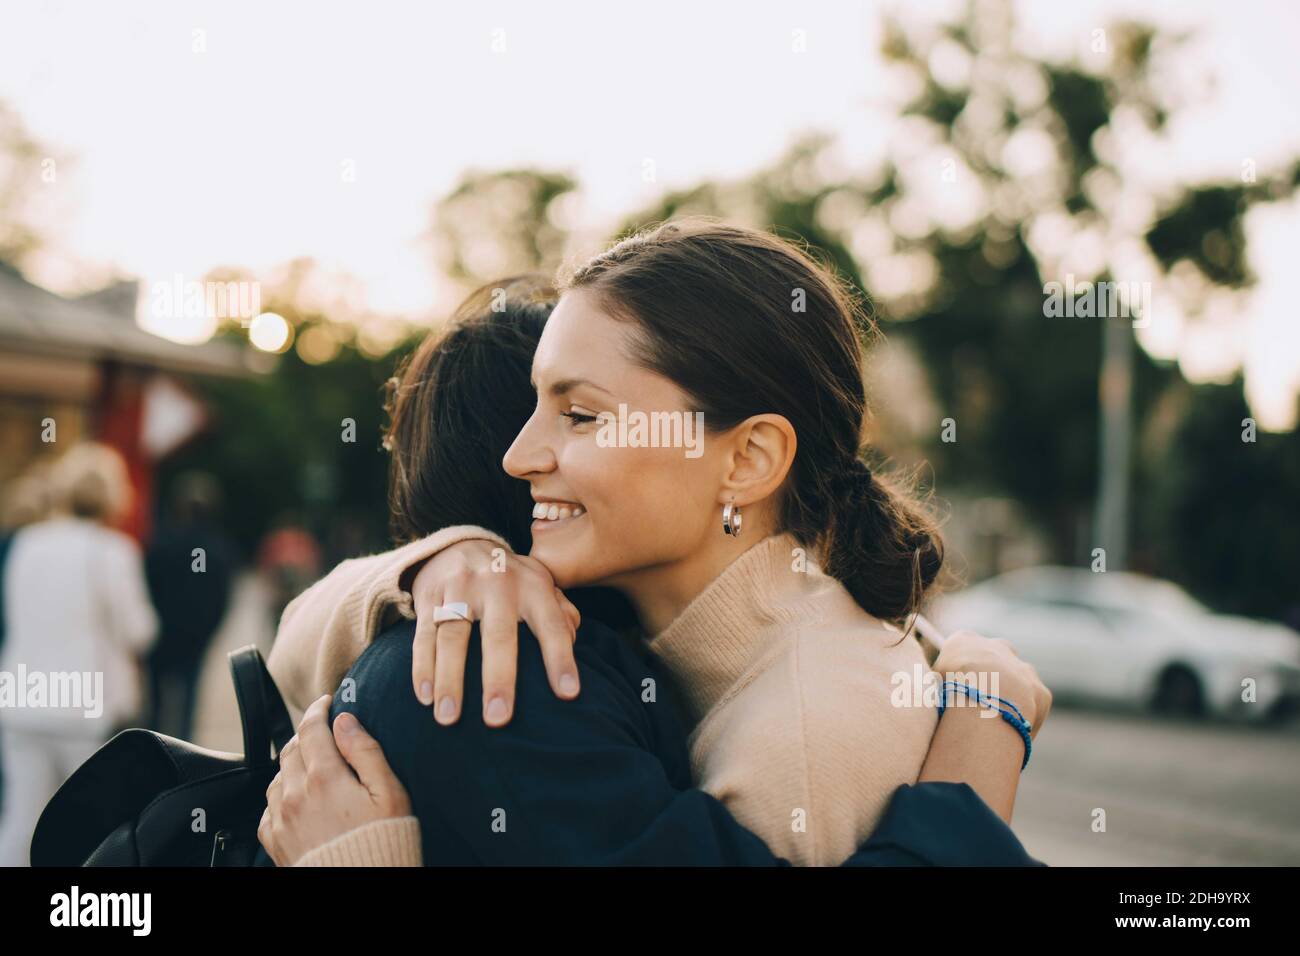 Smiling young woman embracing female friend in city Stock Photo